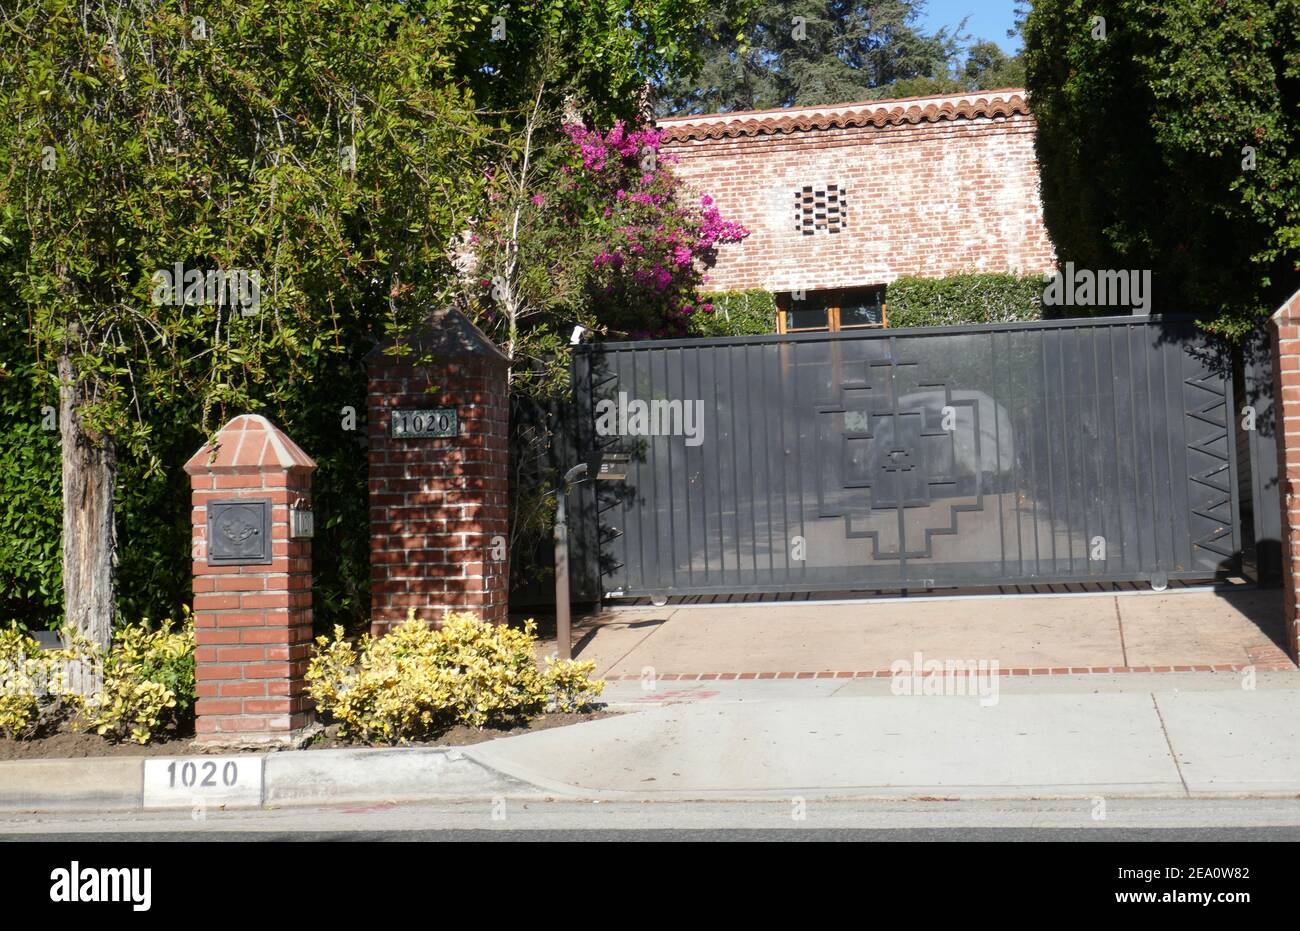 Beverly Hills, California, USA 6th February 2021 A general view of atmosphere of actor Mickey Rourke and model Carre Otis former home/house at 1020 Benedict Canyon Drive on February 6, 2021 in Beverly Hills, California, USA. Photo by Barry King/Alamy Stock Photo Stock Photo